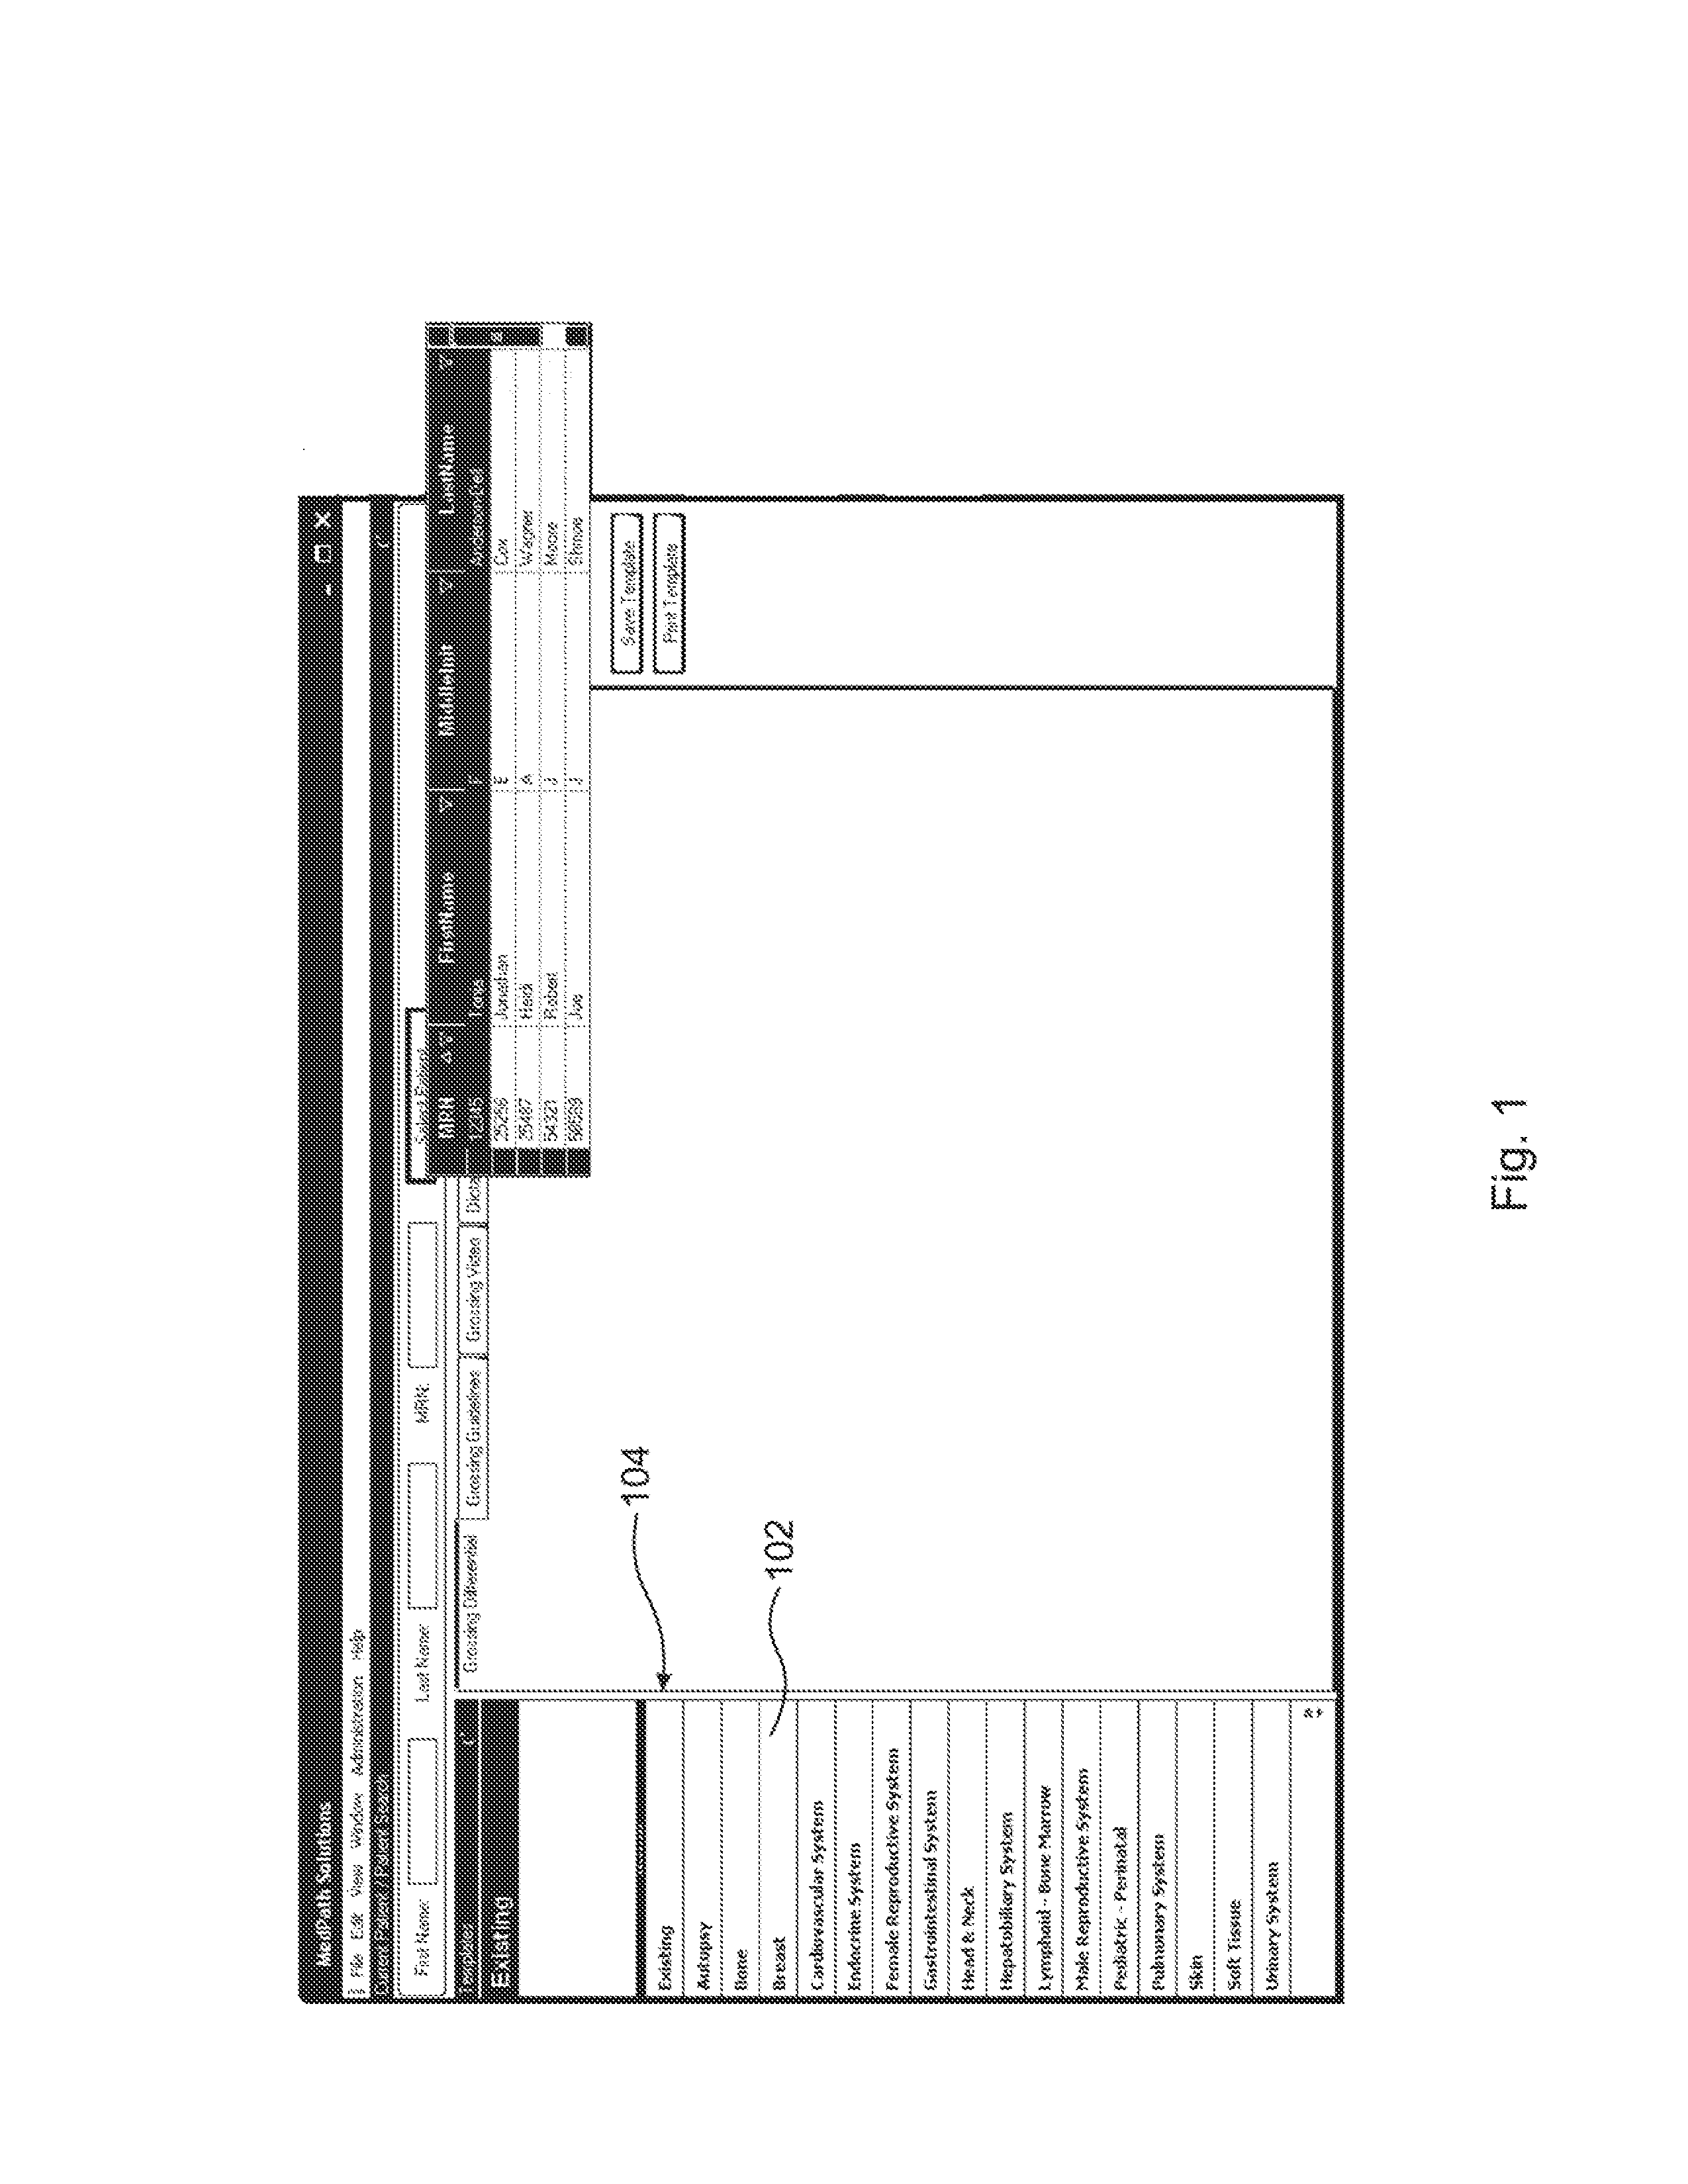 Computer based standardized method and apparatus for guiding decision support for surgical anatomic pathology operations